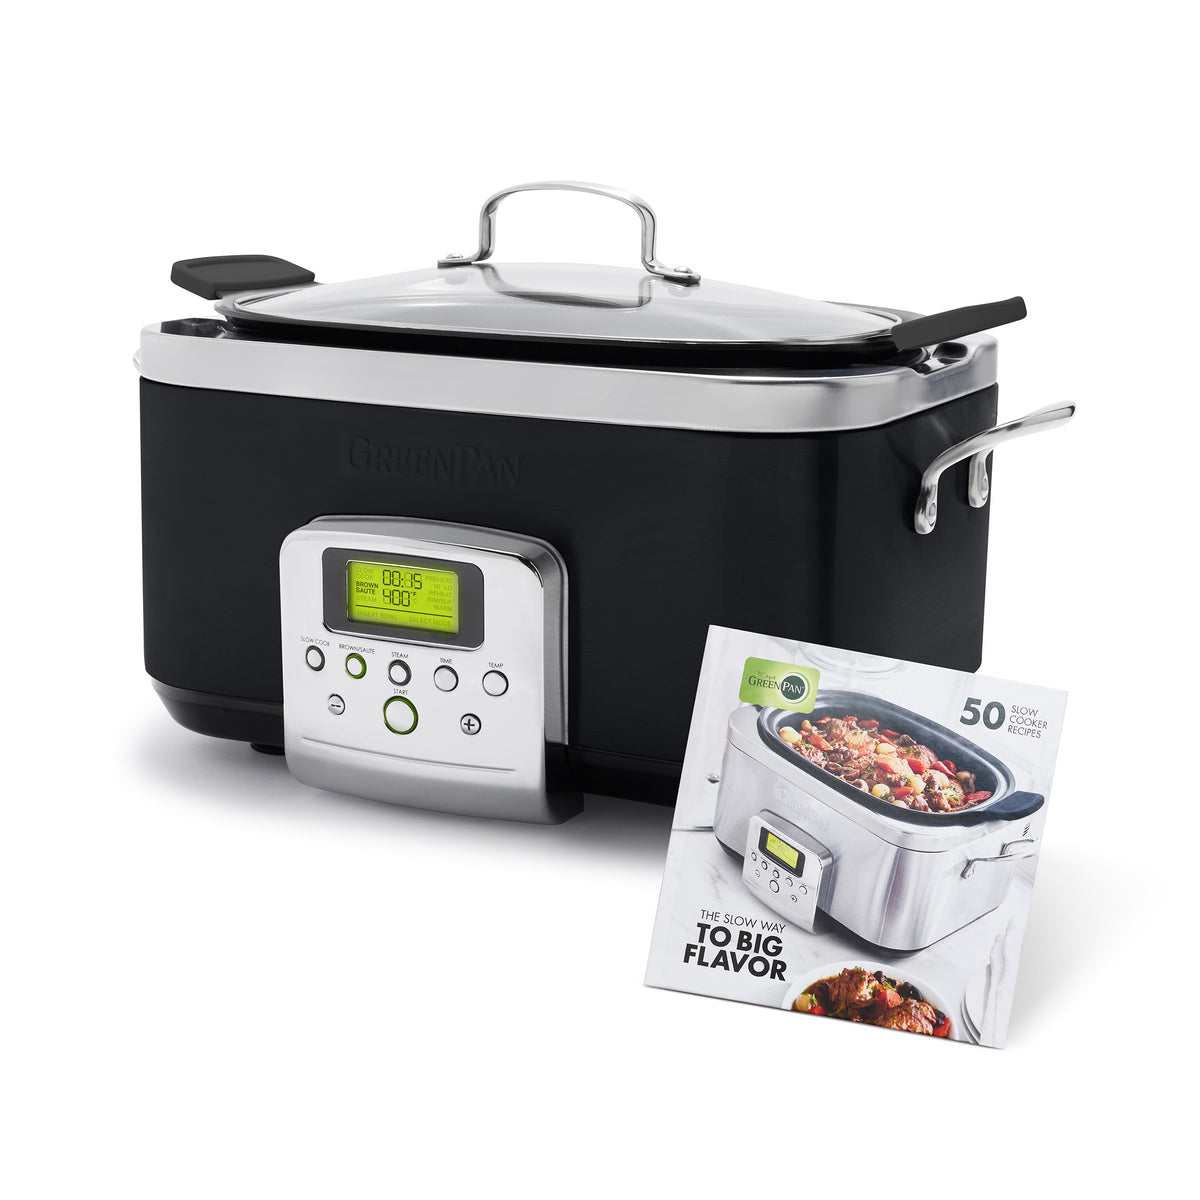 Crock-Pot - 8-Qt. Express Crock Programmable Slow Cooker and Pressure  Cooker with Air Fryer Lid - Stainless Steel - Black Friday